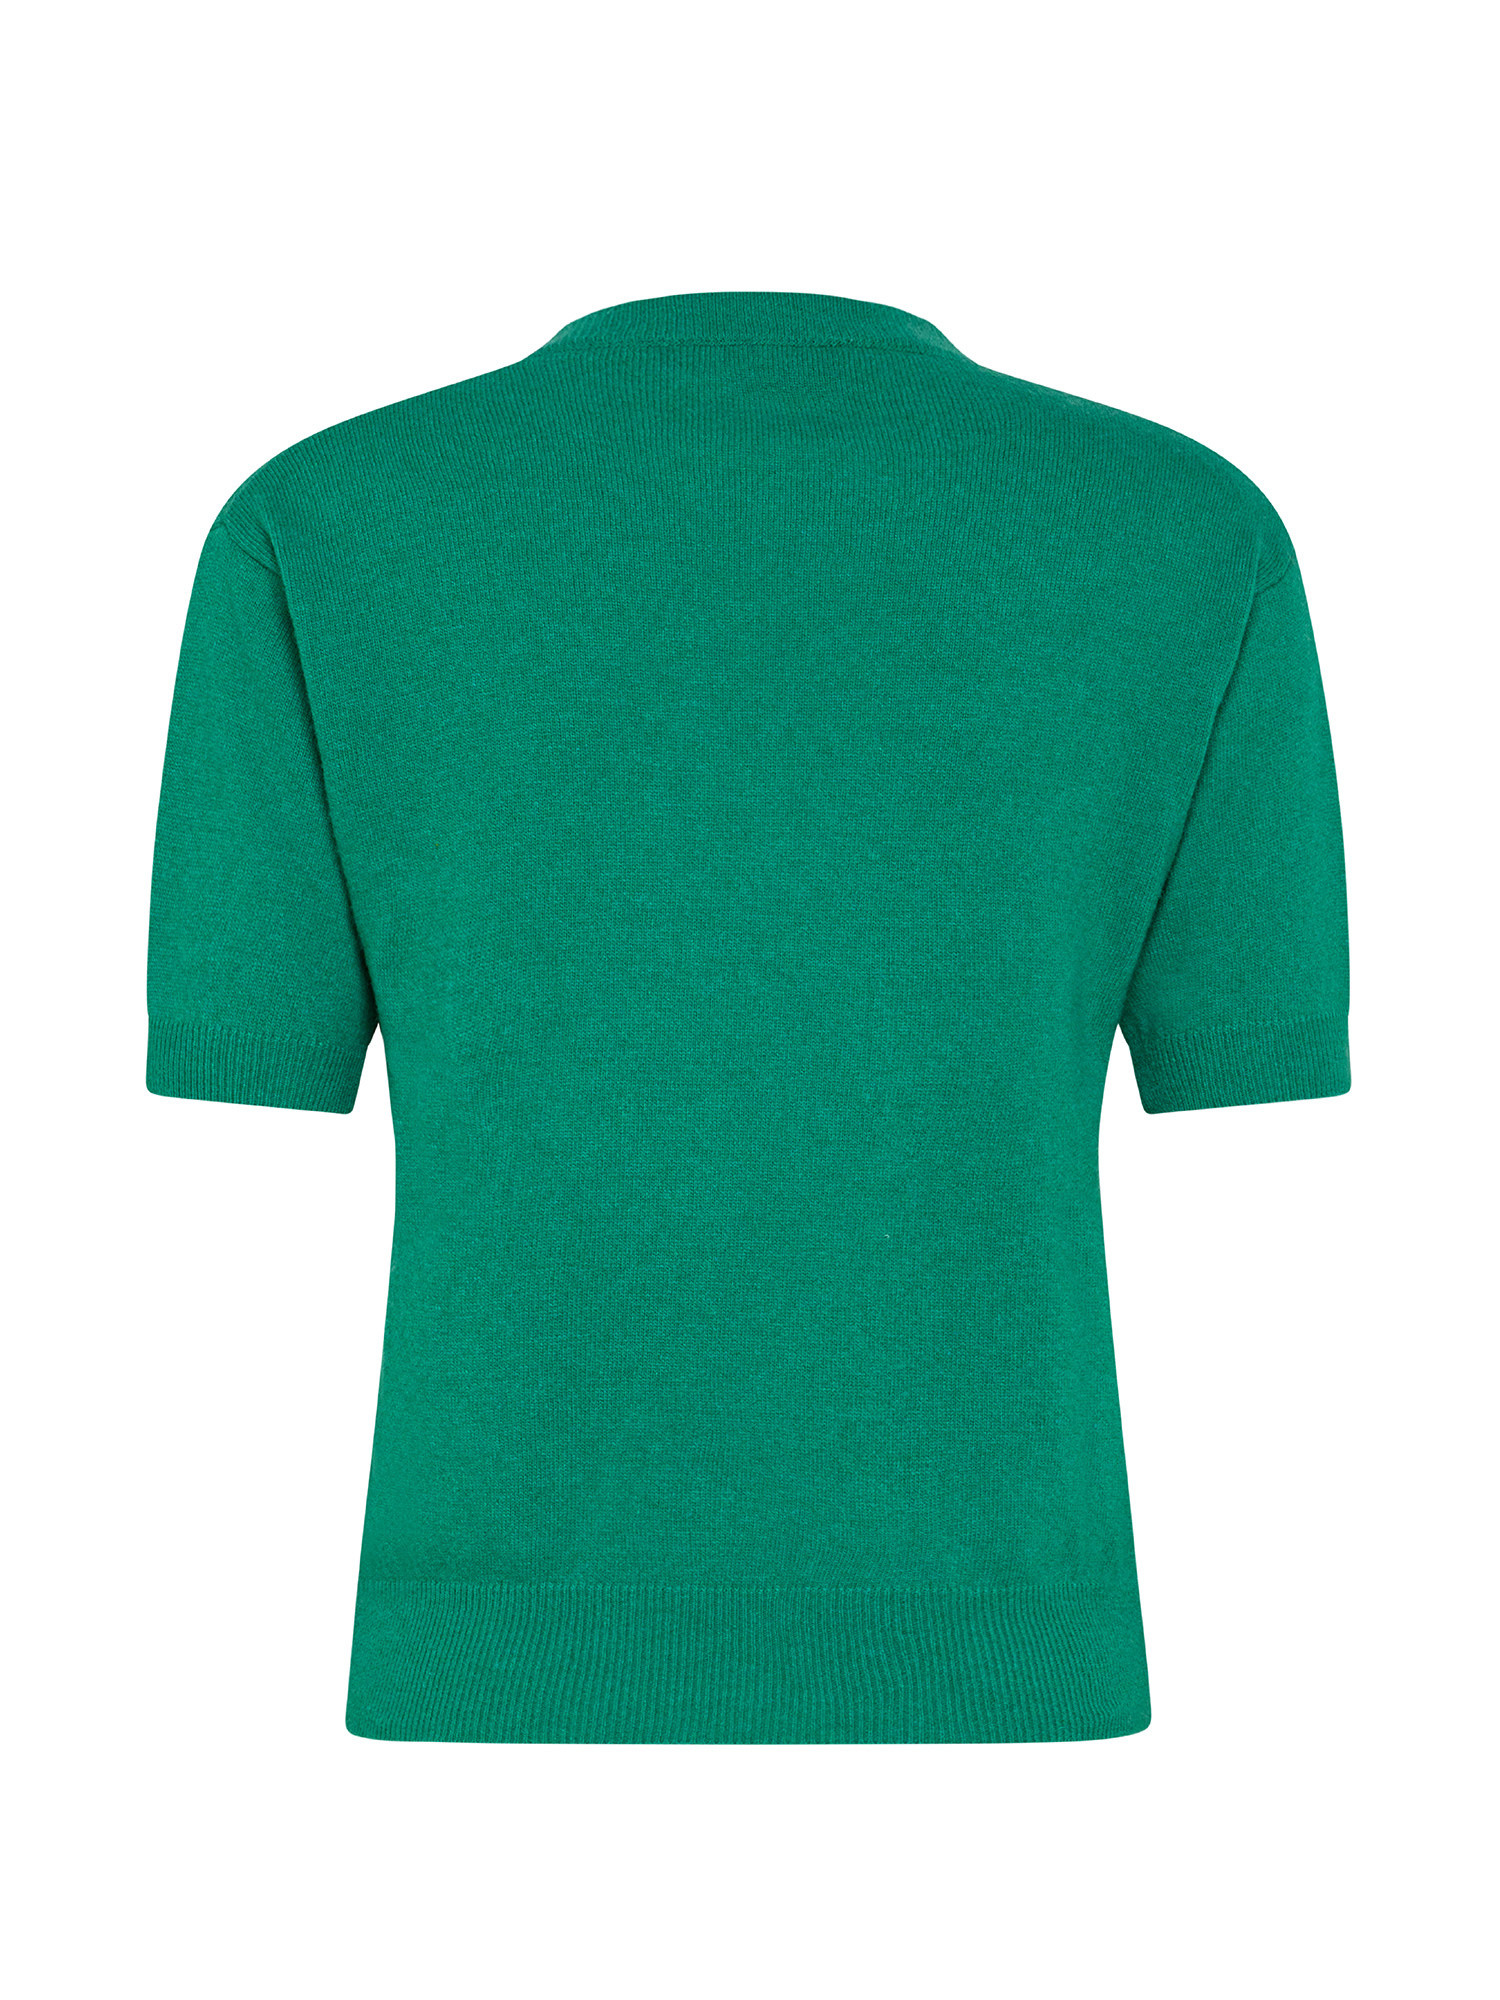 K Collection - Crewneck sweater, Emerald, large image number 2